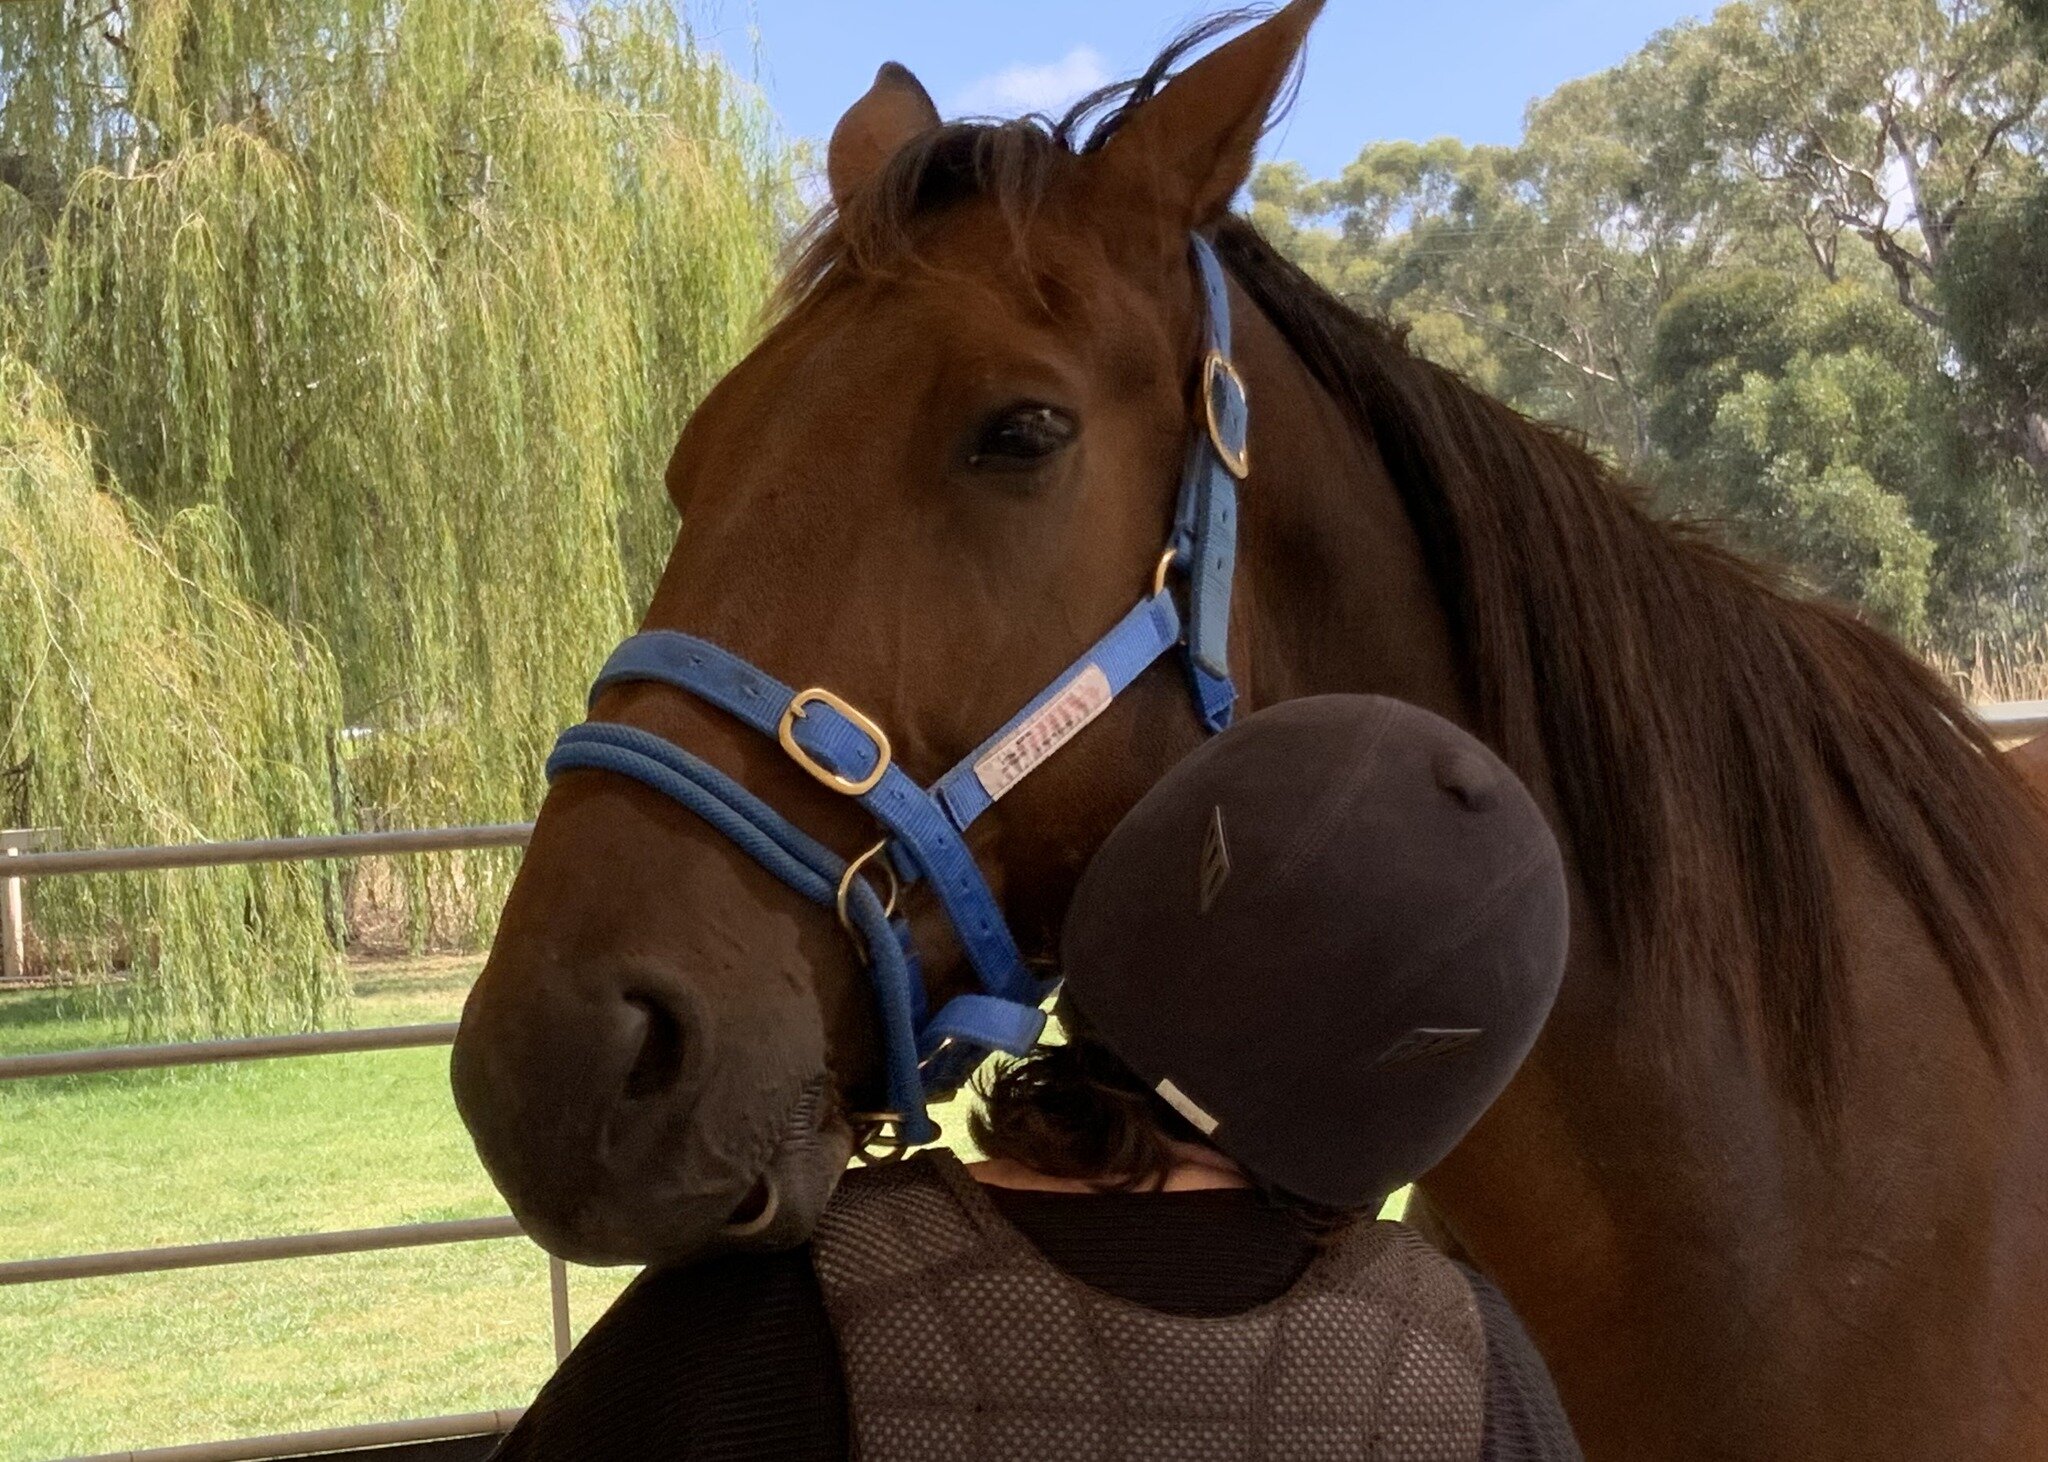 Nothing beats a big heavy headed hug from a very relaxed standardbred to head into the weekend!